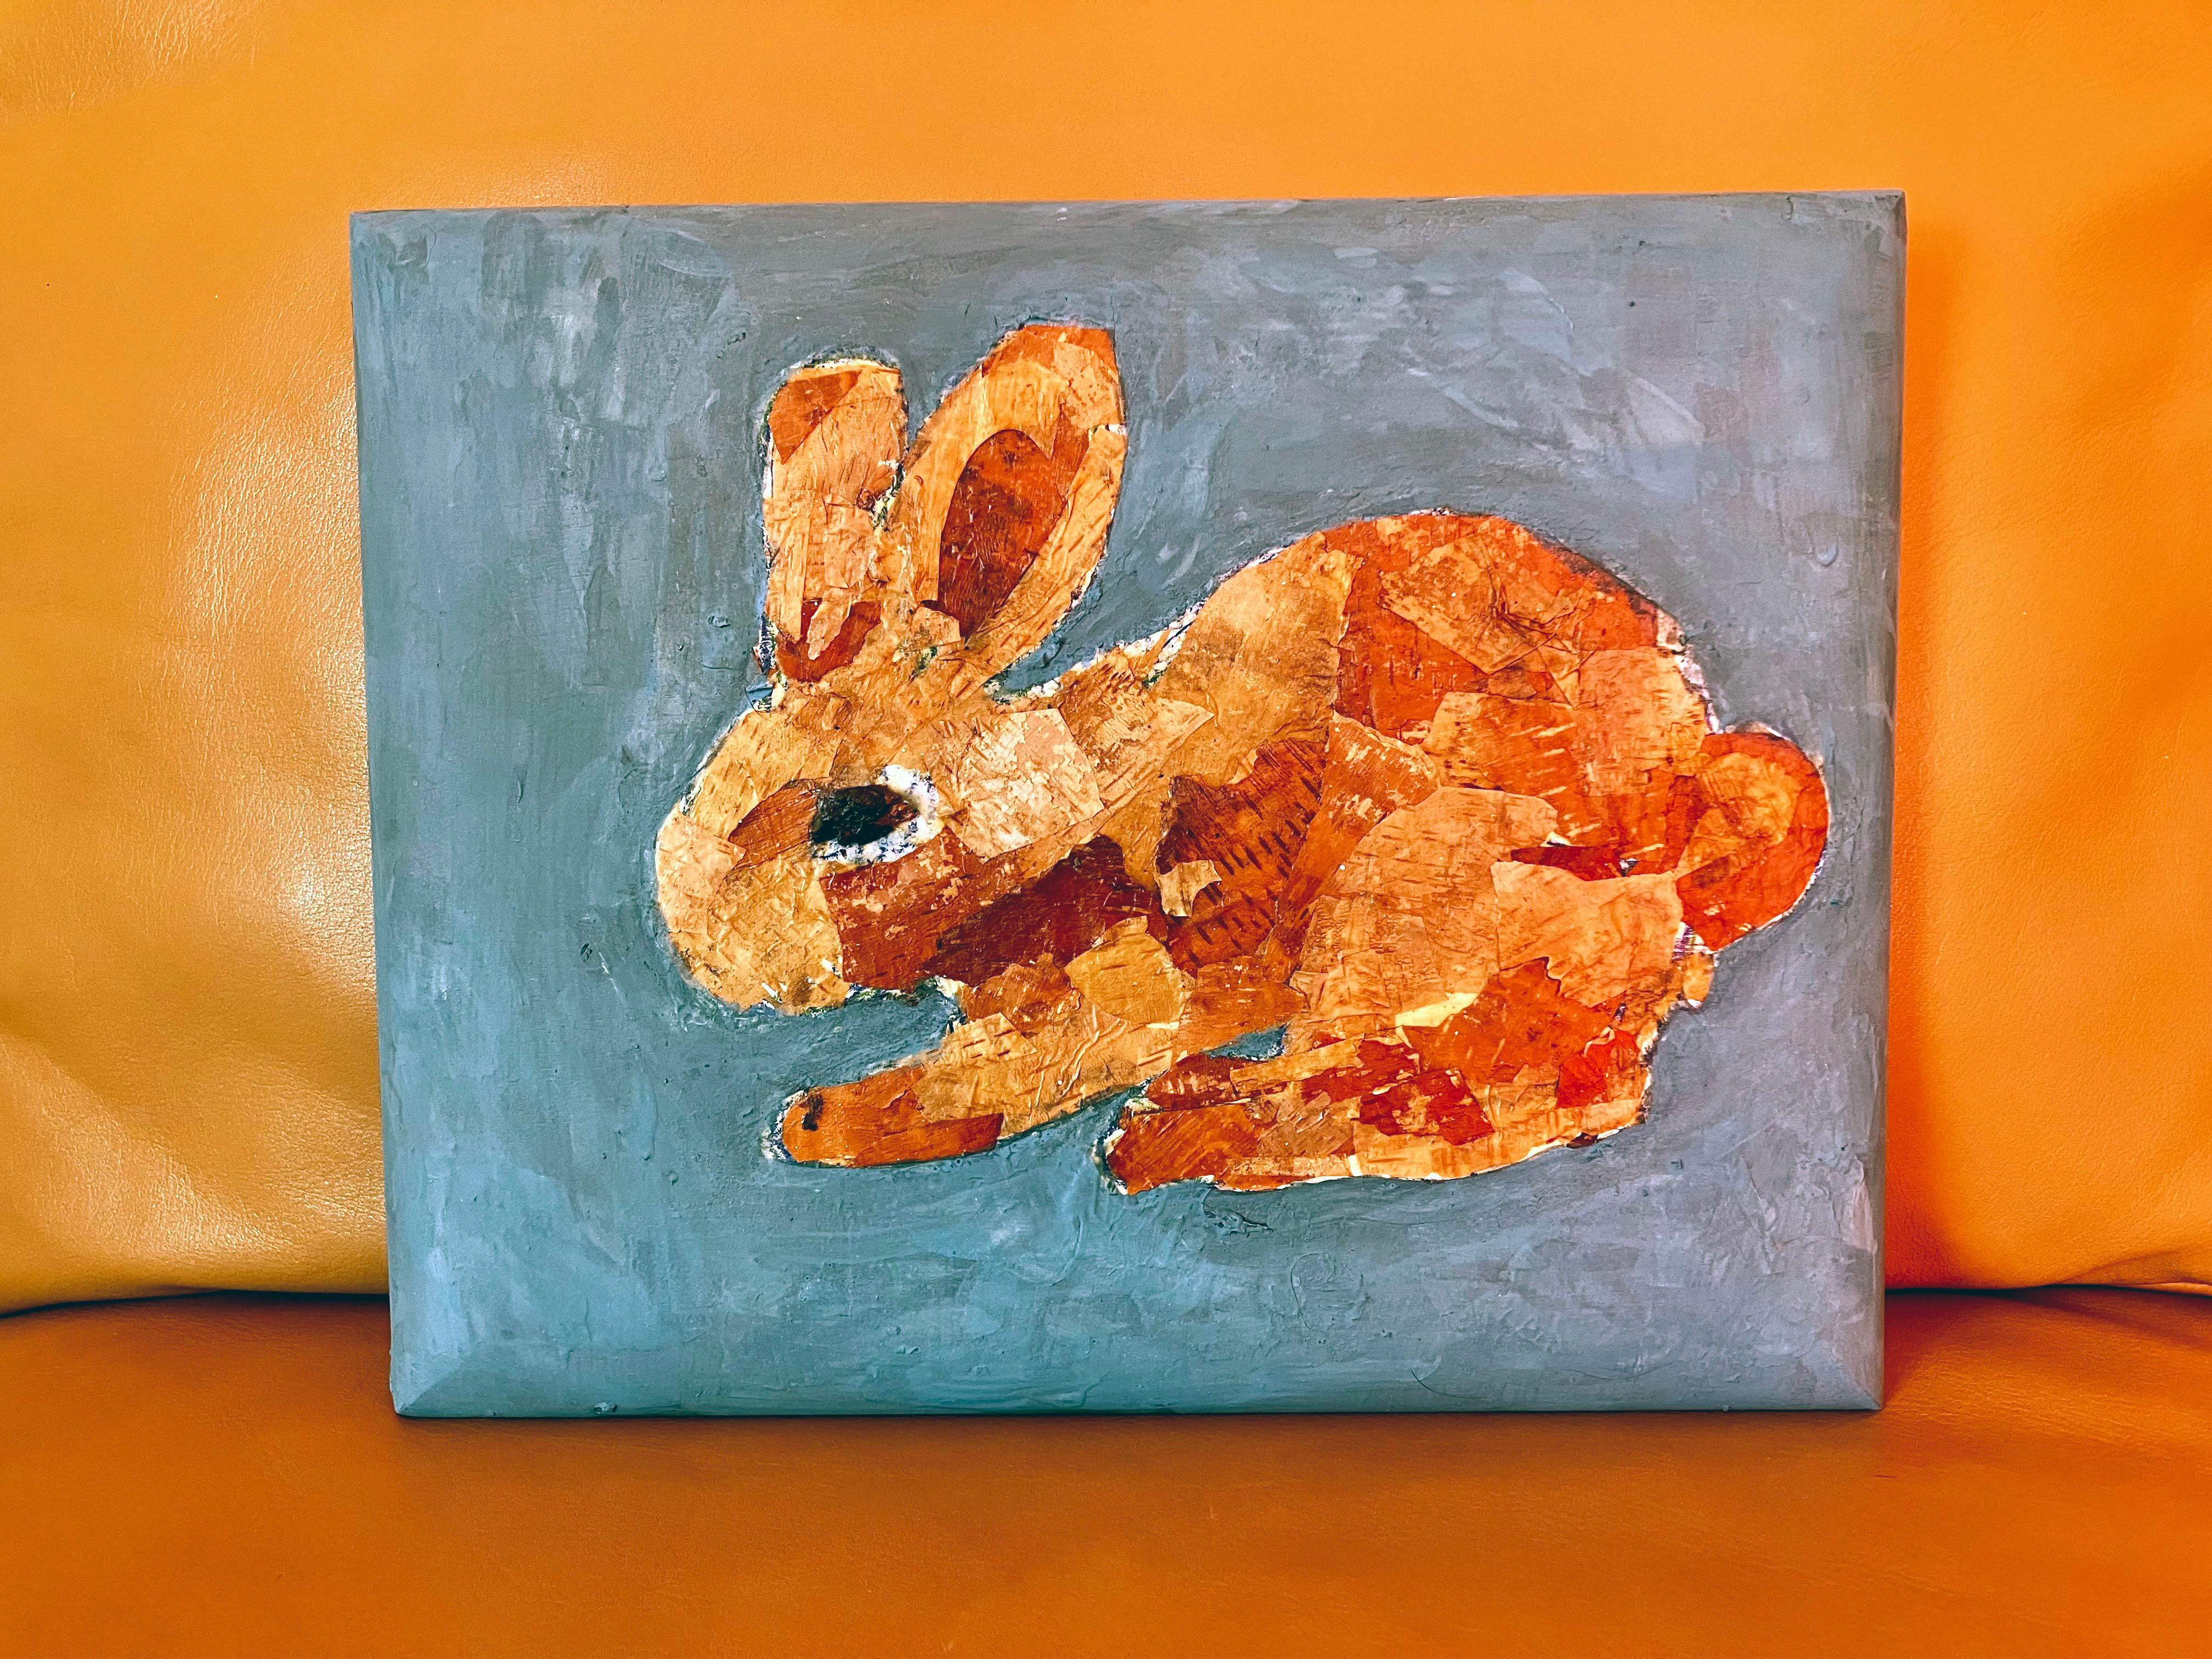 Birch Rabbit I, bunny, orange color painted birch on wood trophy plaque - Painting by C. Dimitri